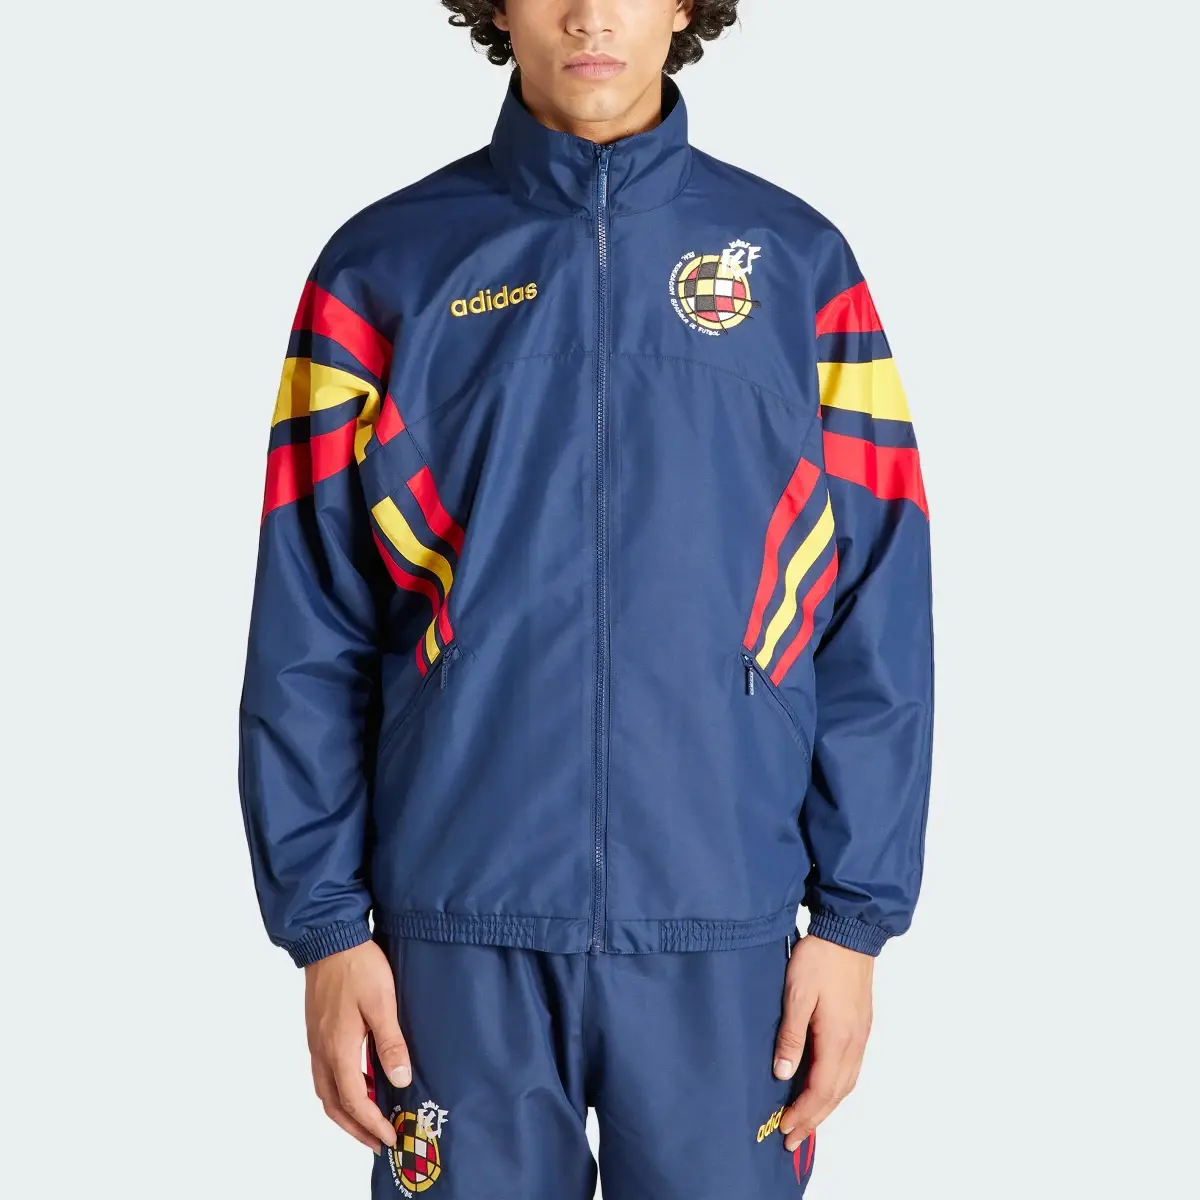 Adidas Spain 1996 Woven Track Top. 1